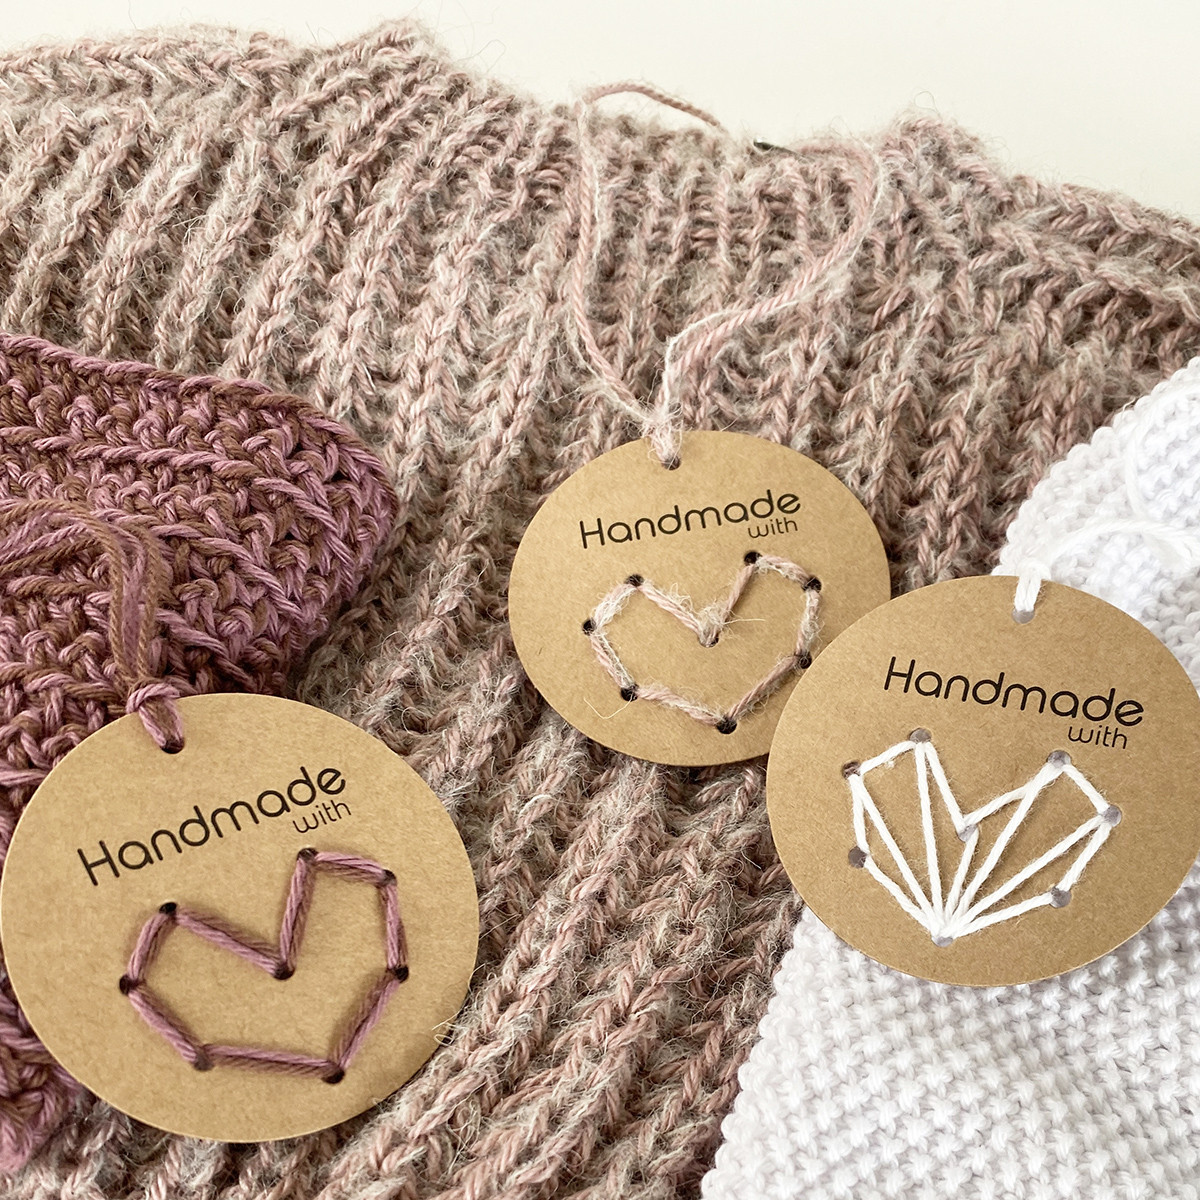 Made by labels for knitting and other needlework